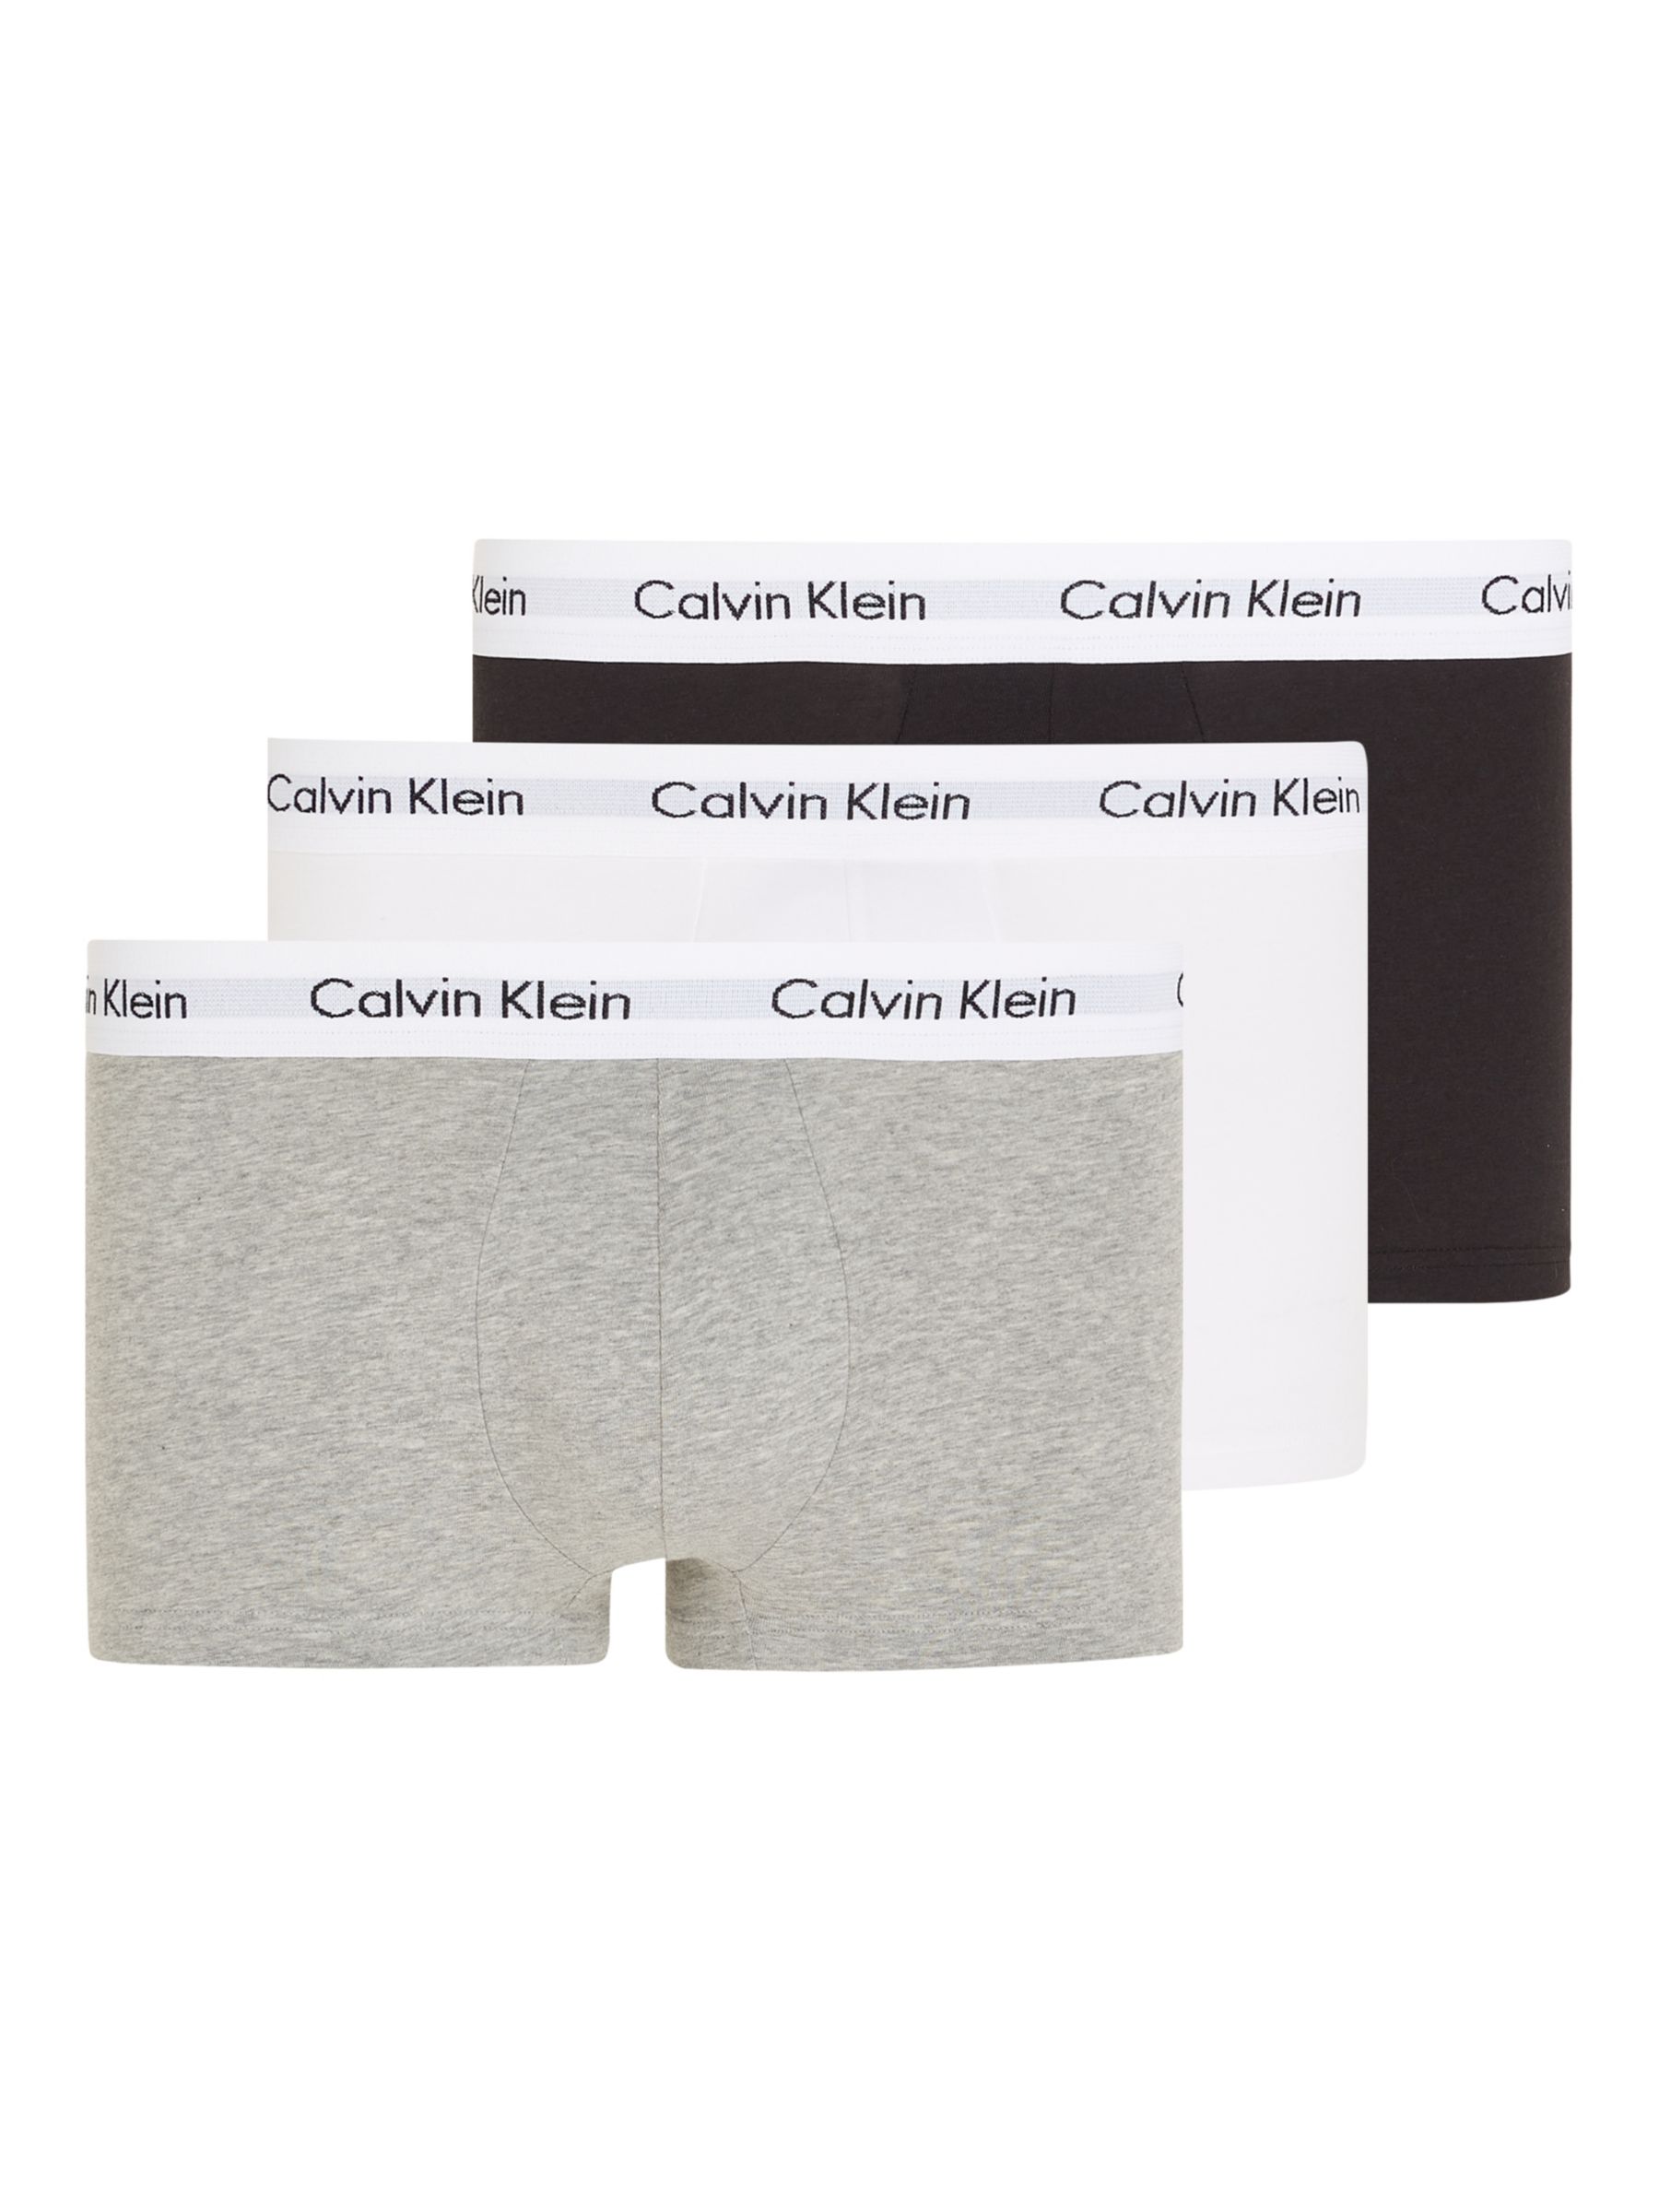 Calvin Klein Low Rise Cotton Stretch Trunks, Pack of 3, Black/White ...